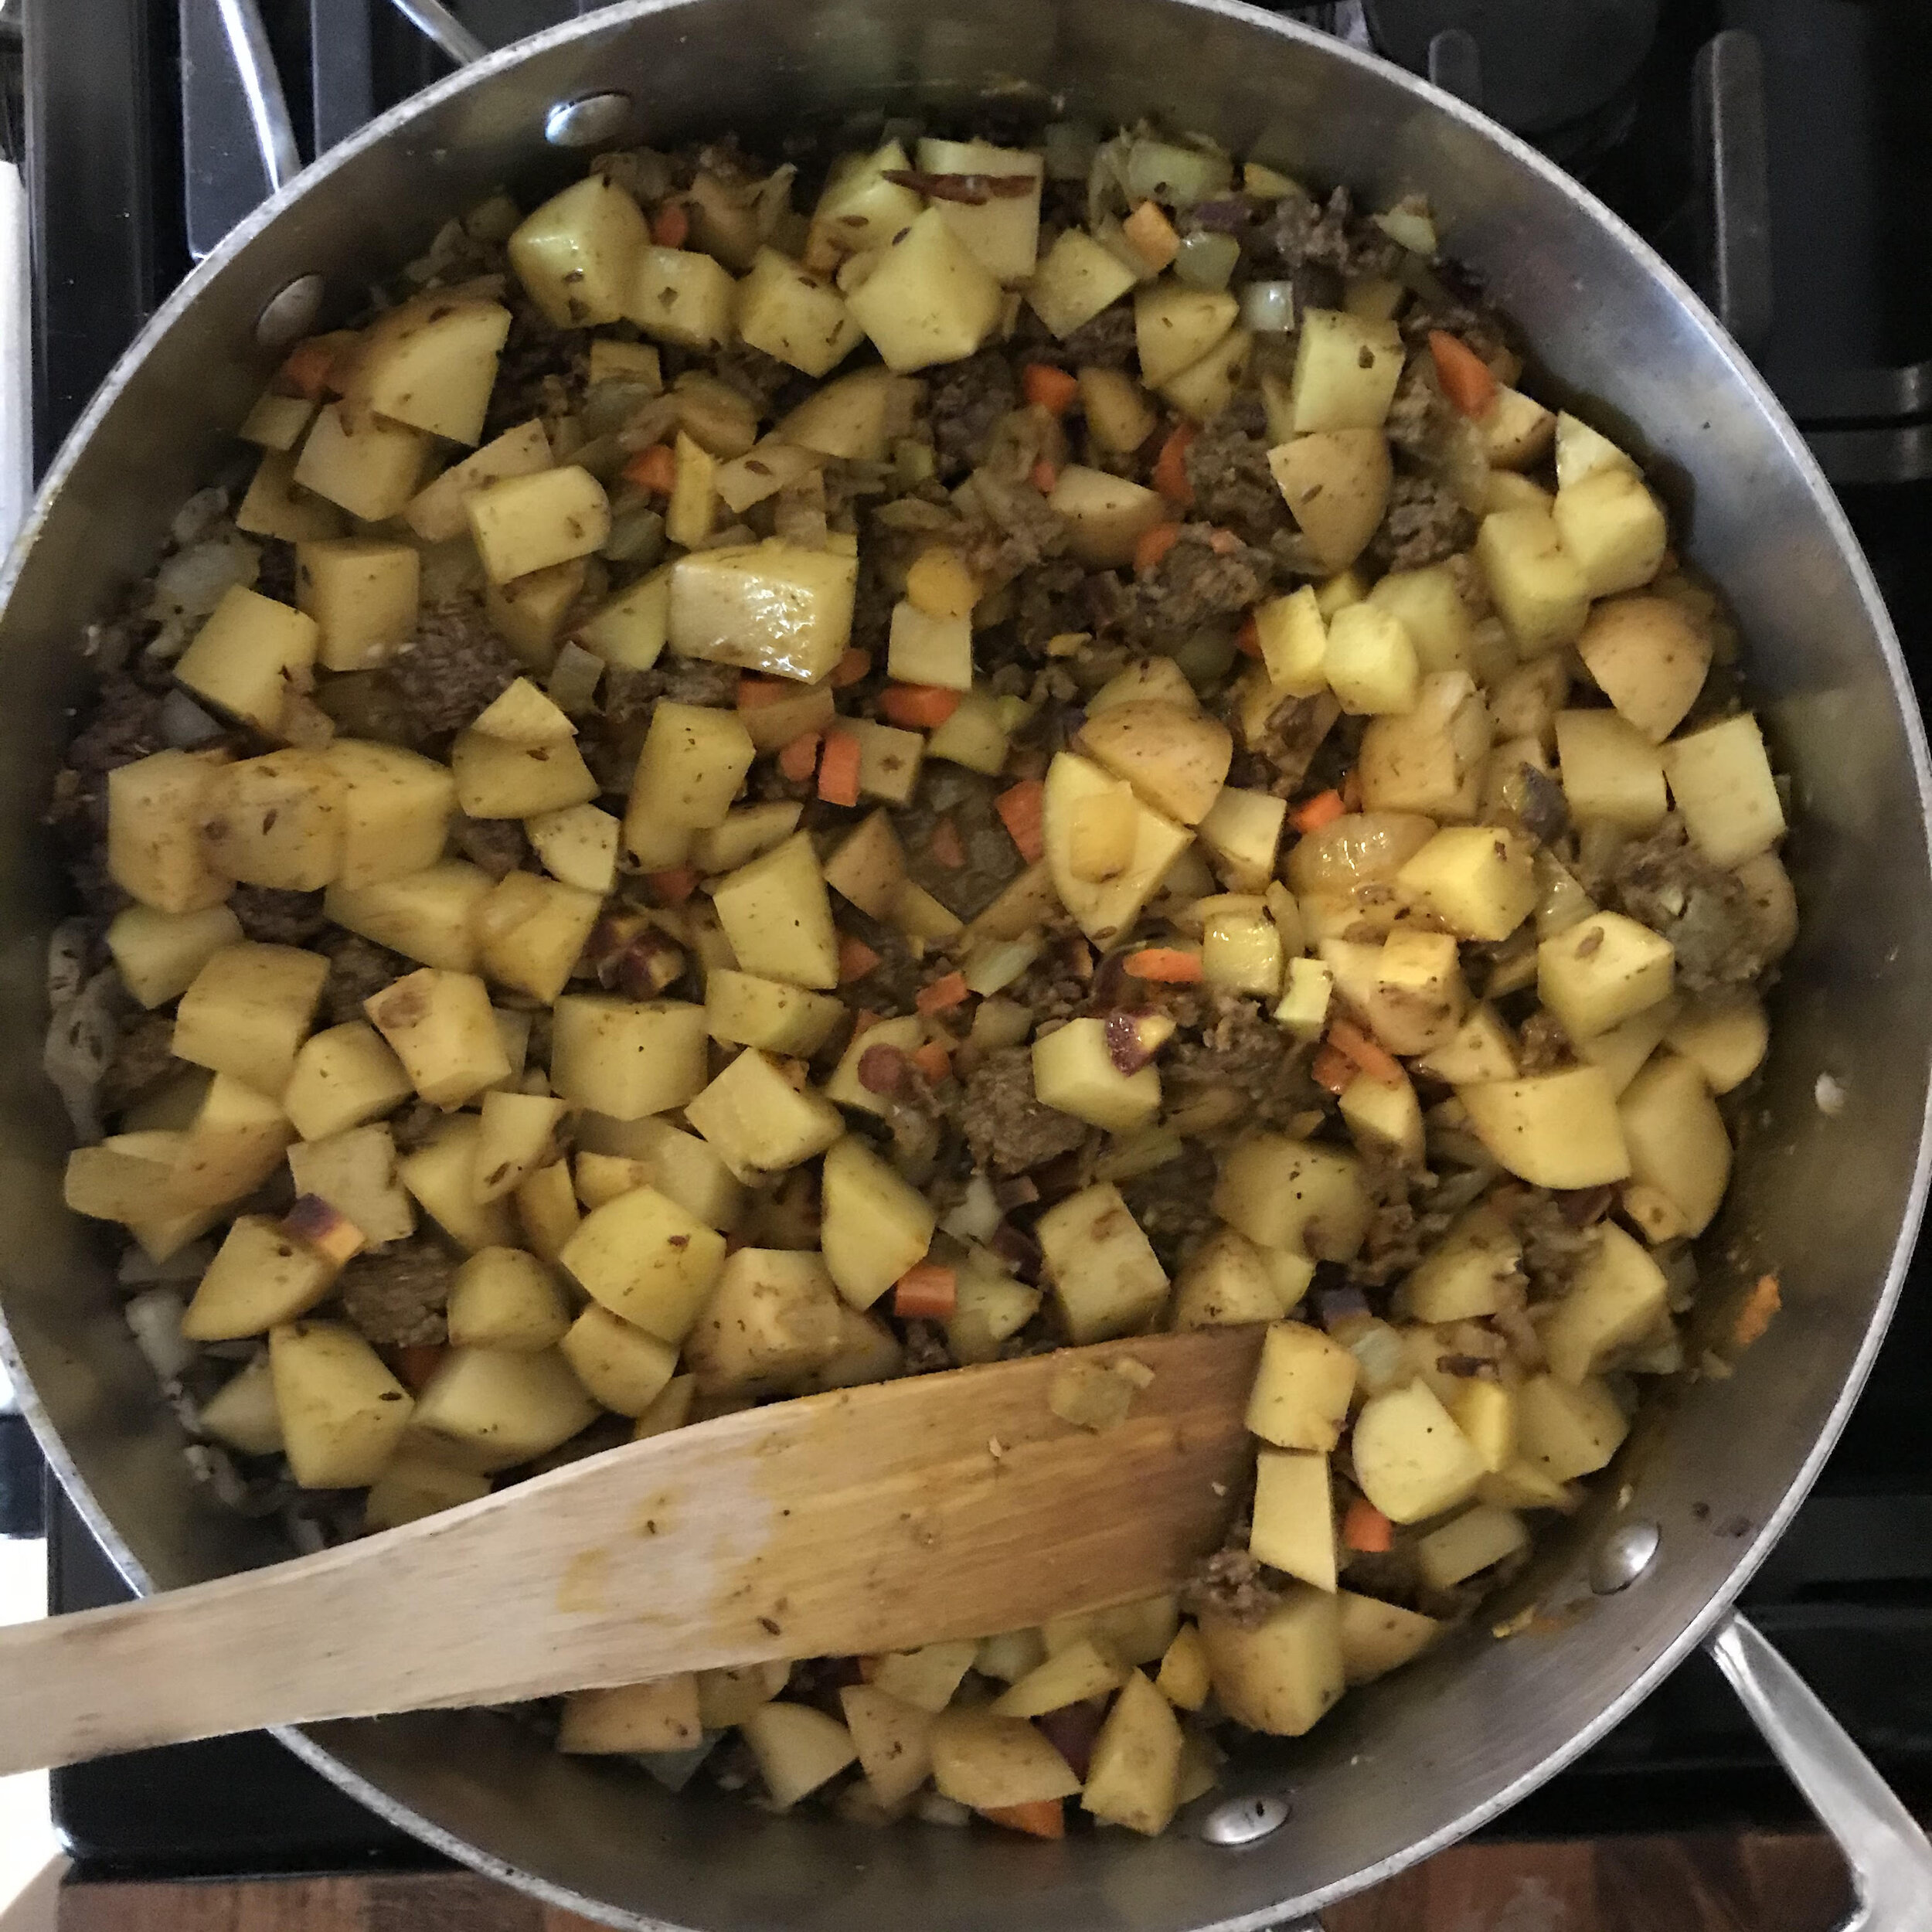 Add the potatoes and then the carrots